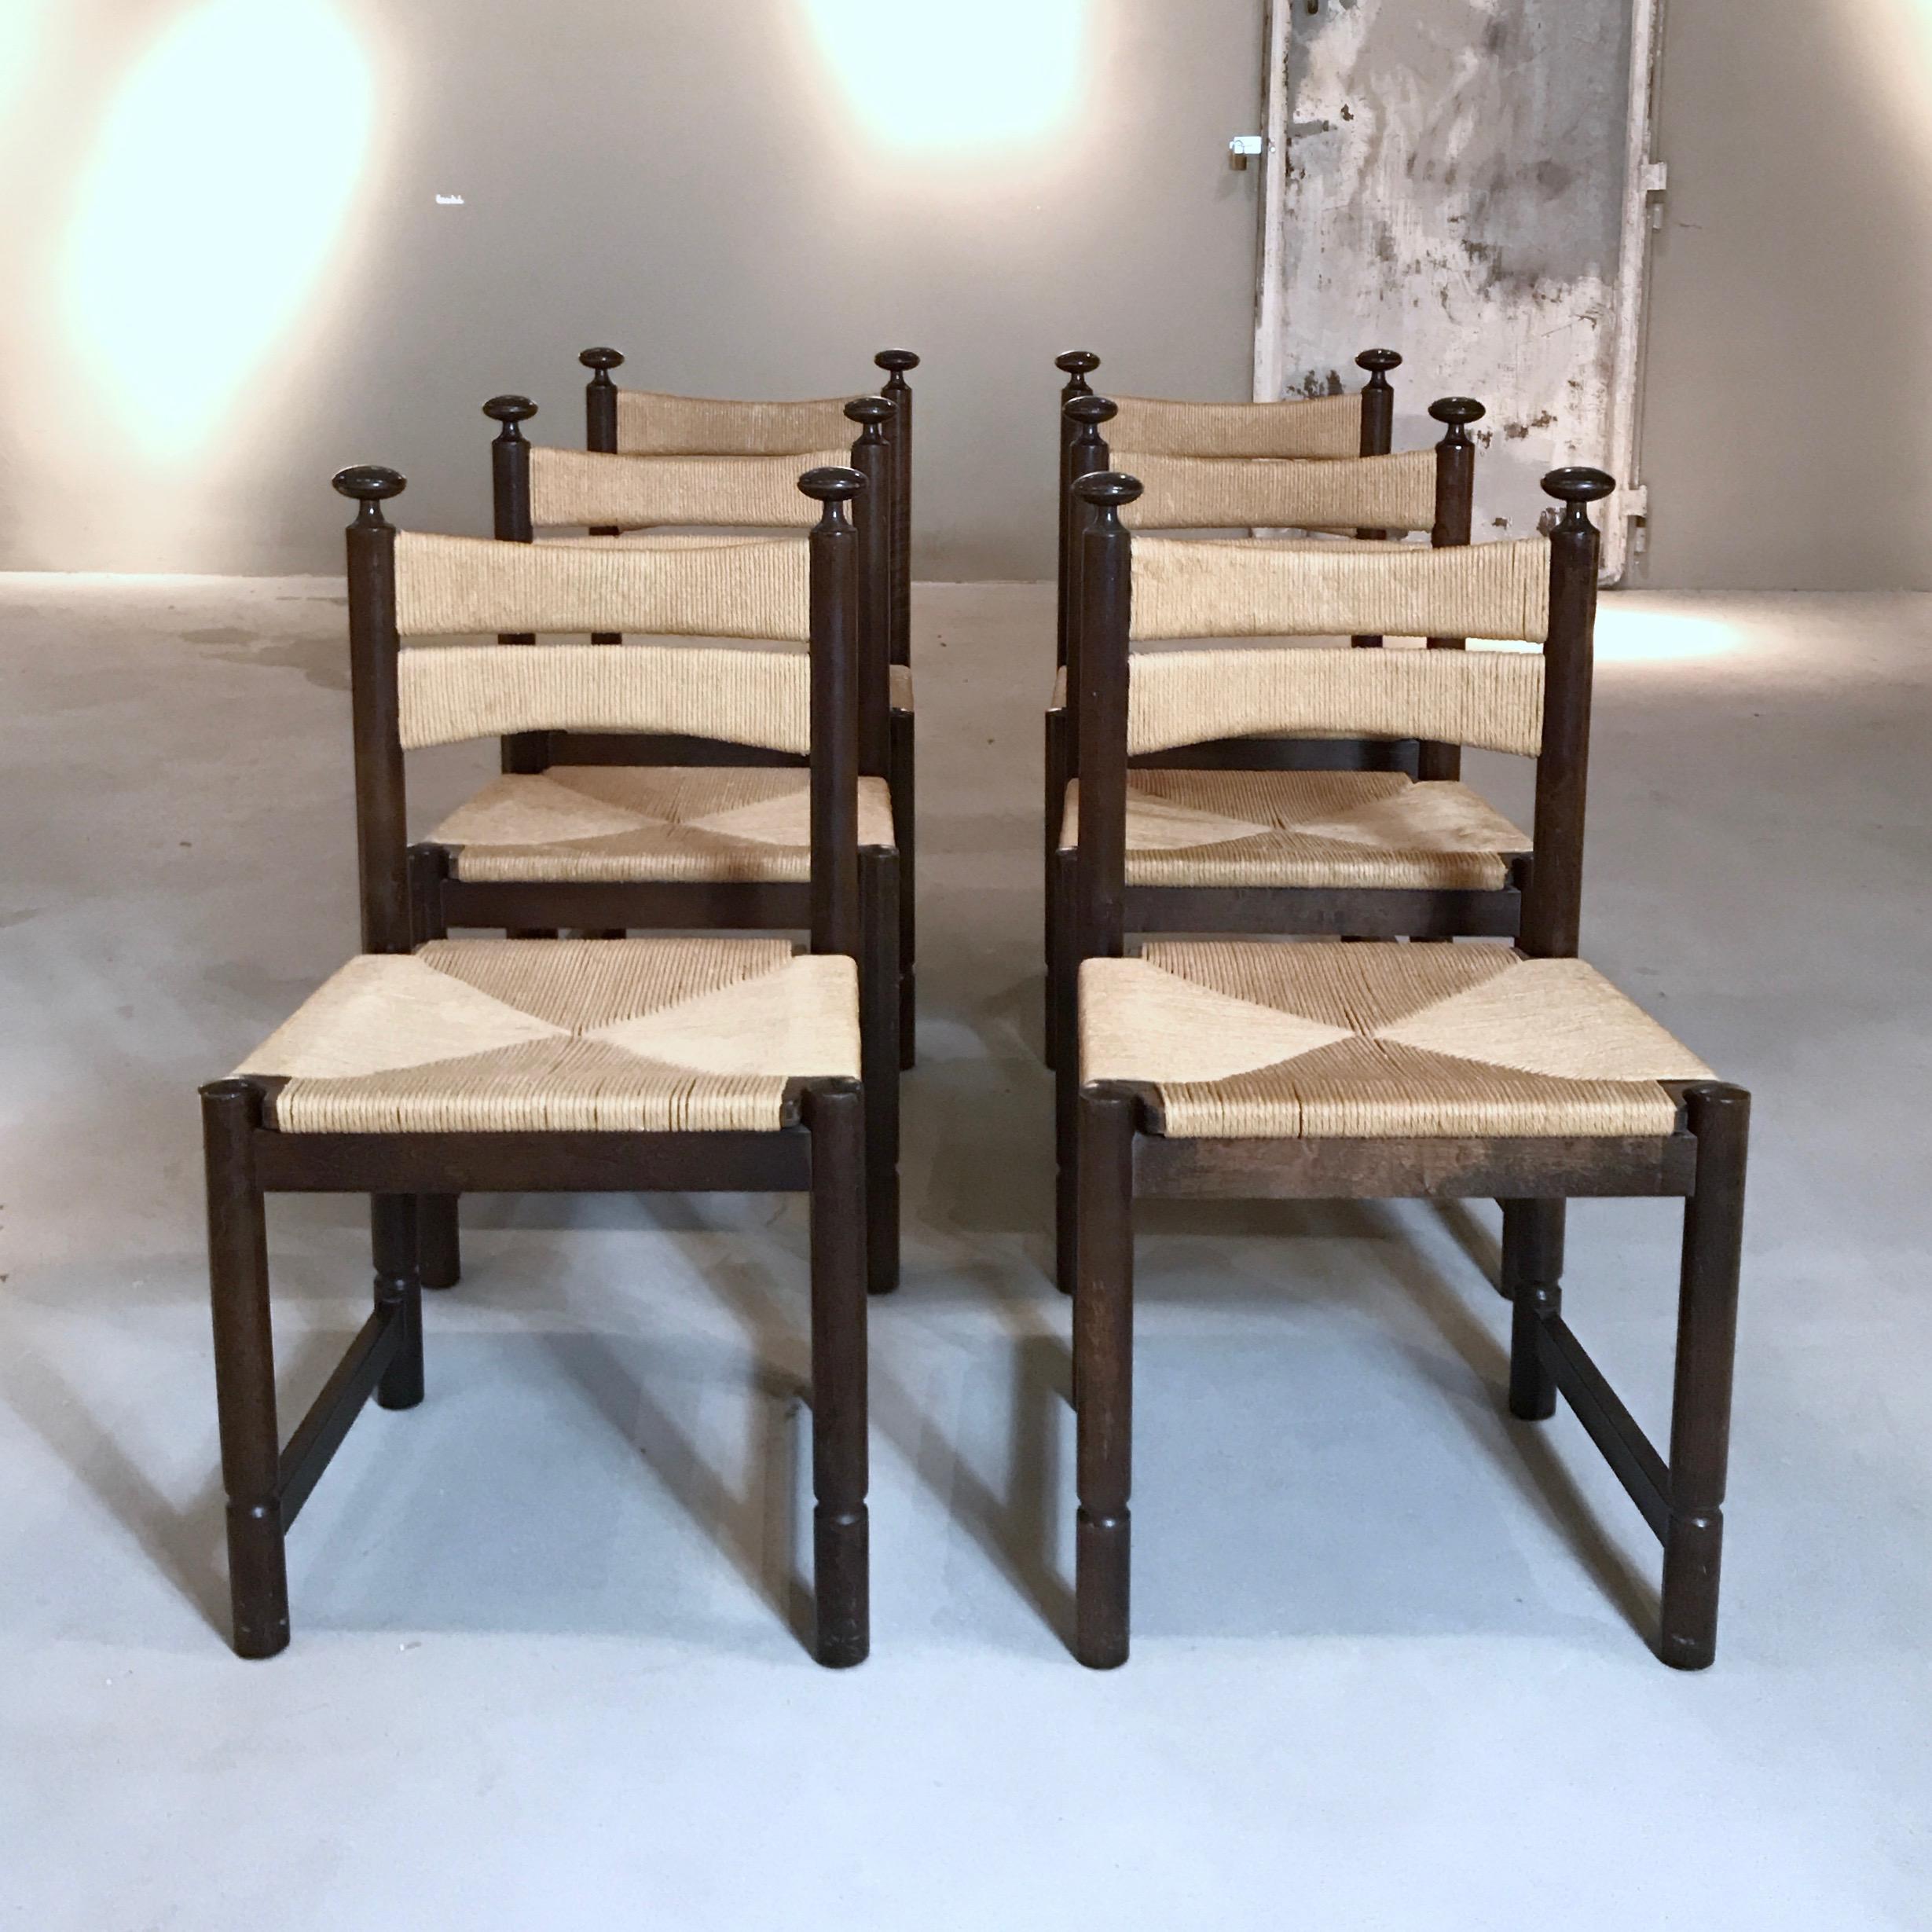 Rare Asko chairs designed by Ilmari Tapiovaara, Finland, 1960s. The chairs have a solid walnut wood frame with woven rush seating. The chairs are in good original condition with minor wear due to age and usage. Labeled with the Asko Export decals on